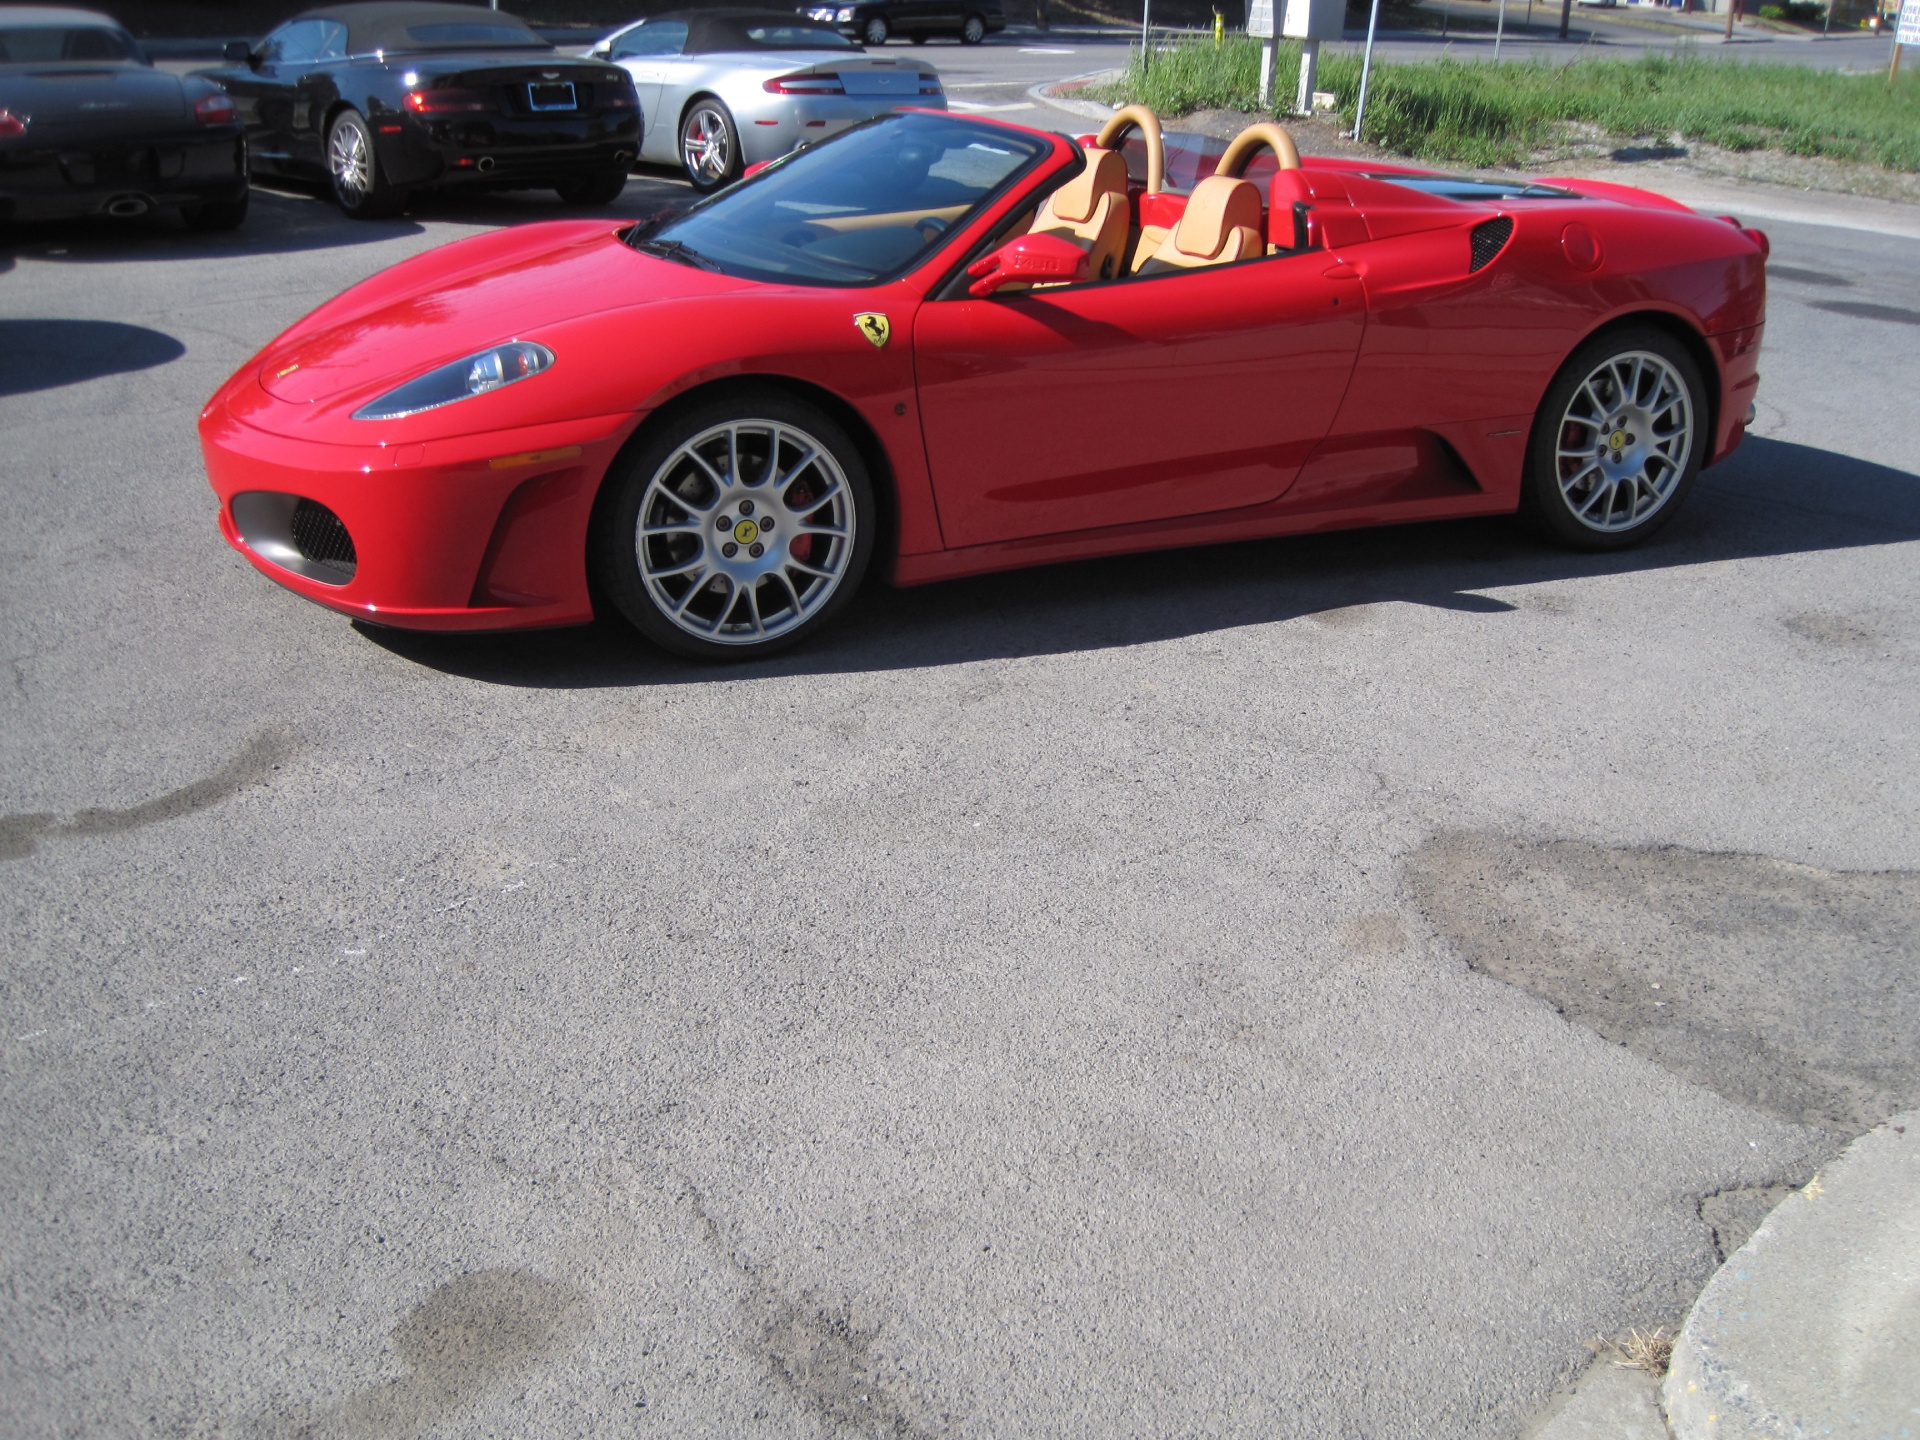 Used 2006 TAN WITH ROSSO PIPING AND STITCHING Ferrari F430 F1 Spider | Albany, NY